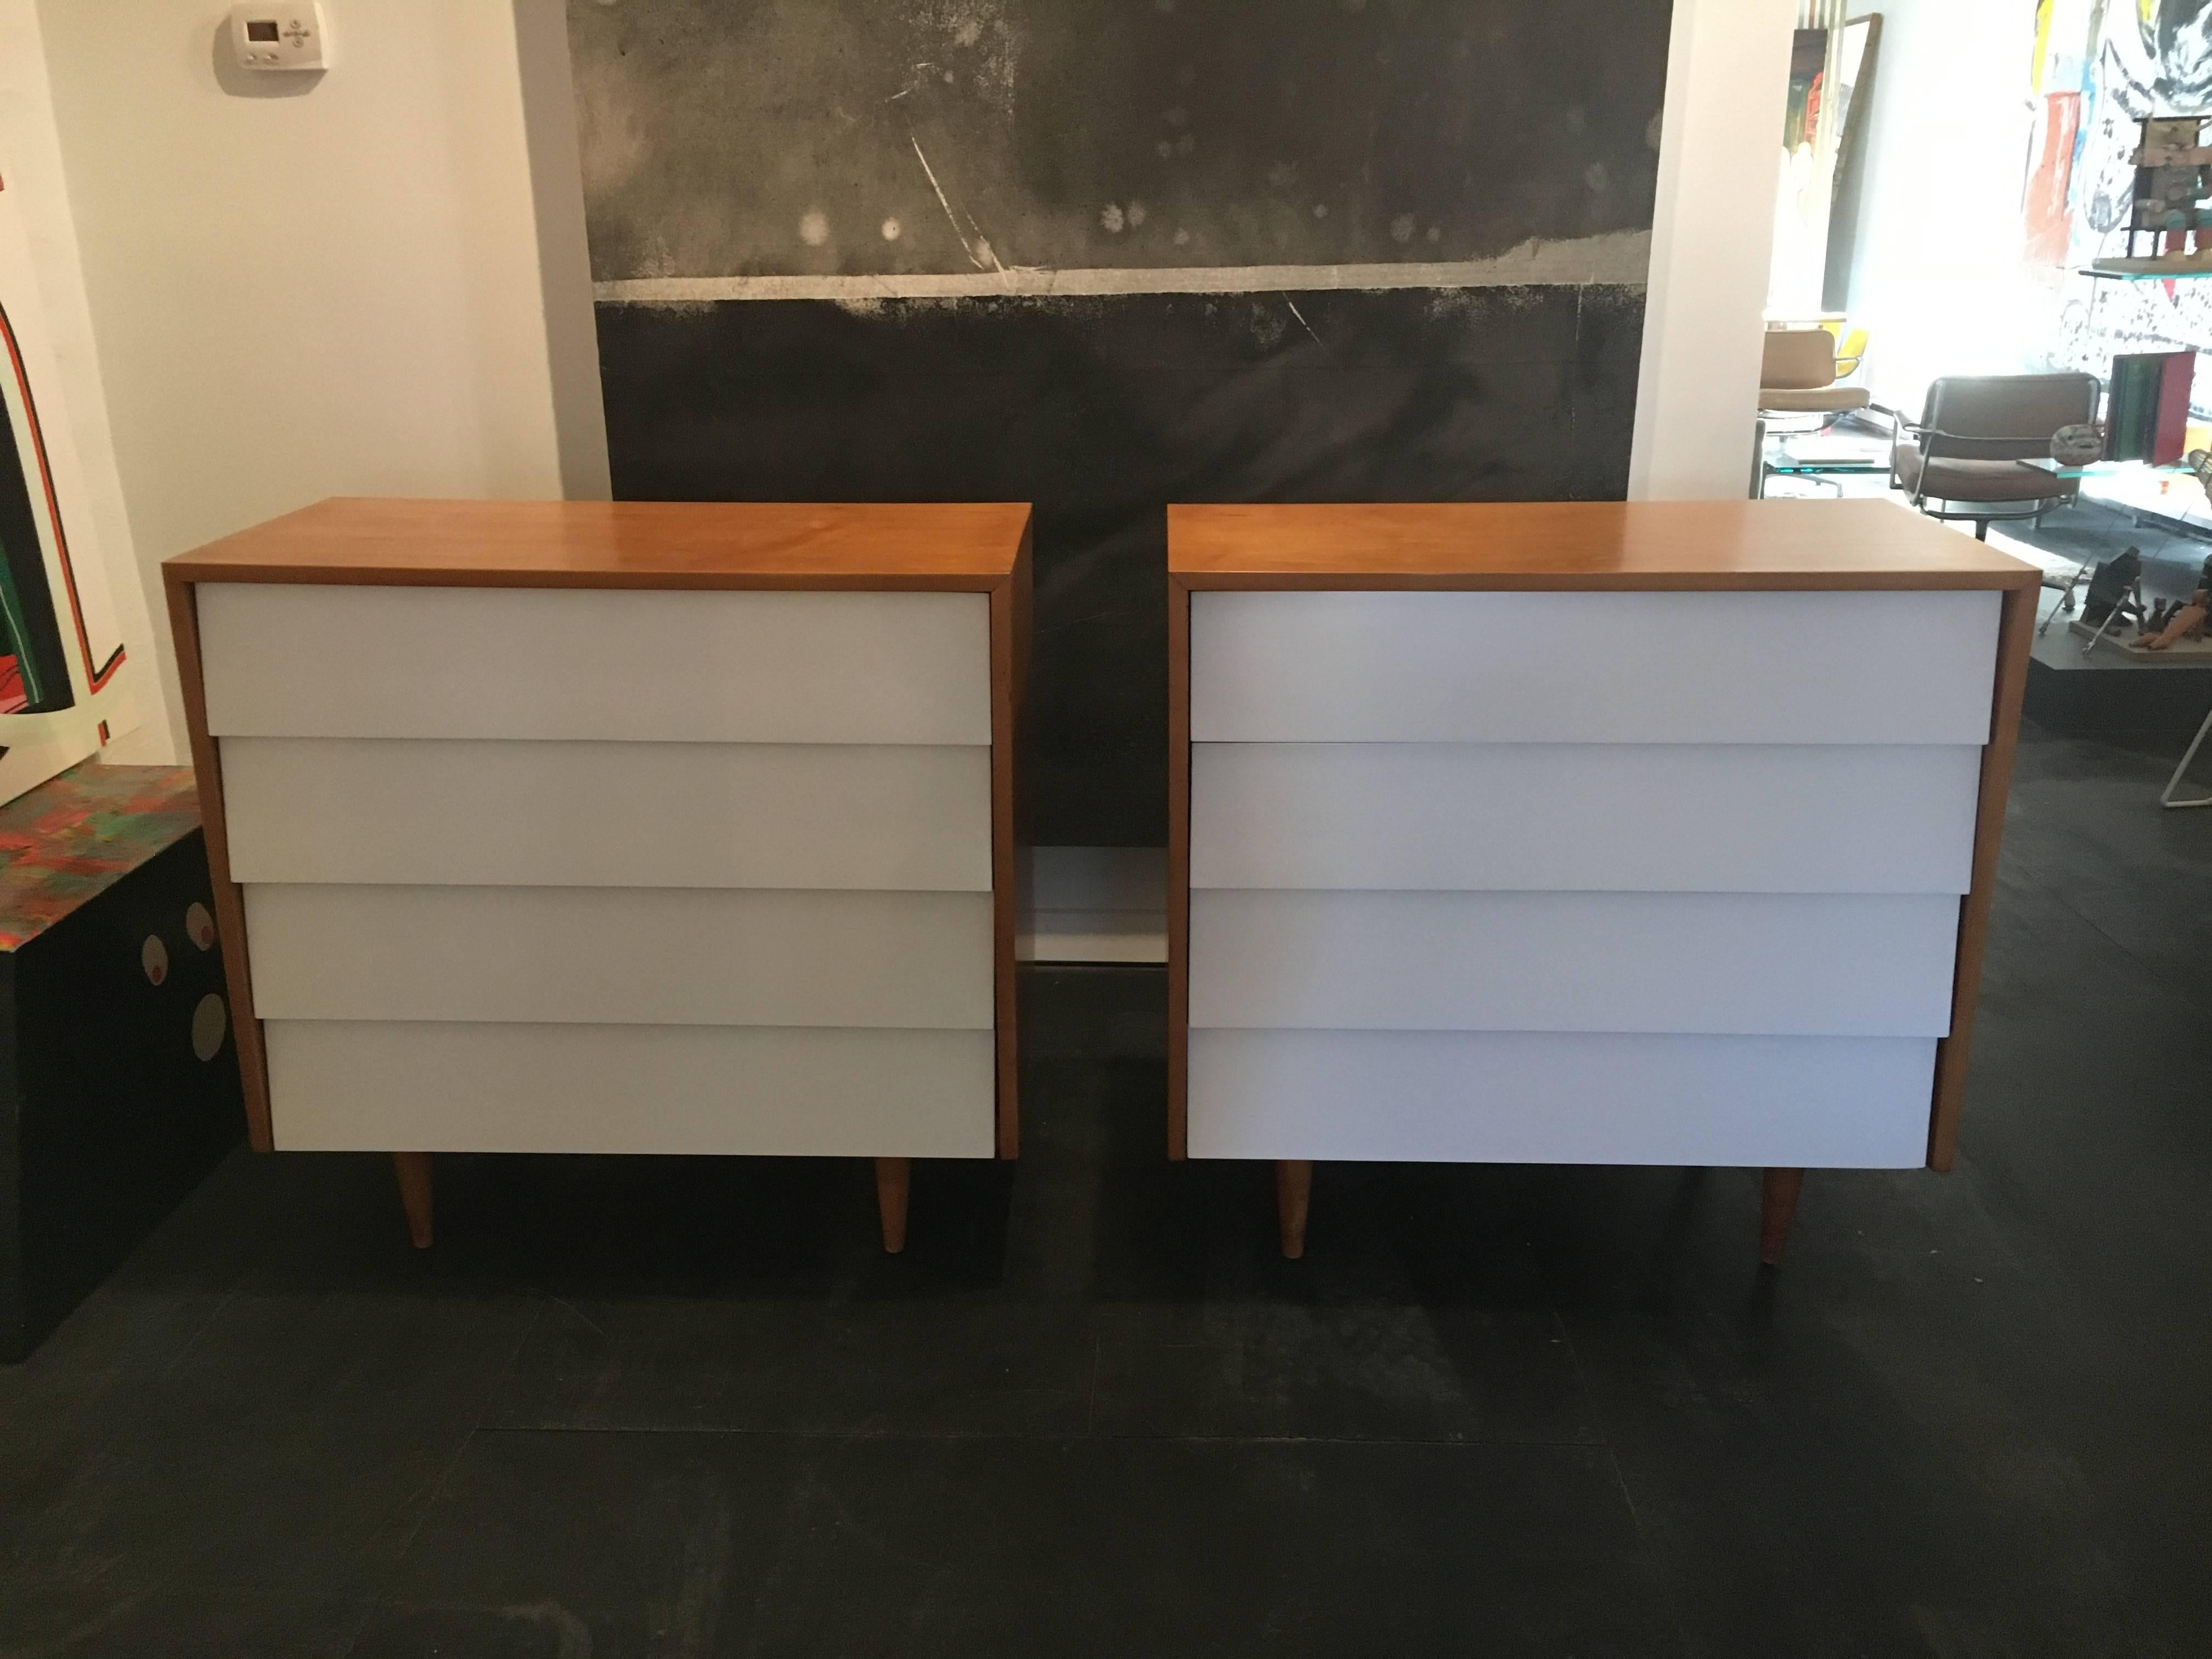 Pair of early four-drawer chests with white lacquer fronts, designed by Florence Knoll for Knoll, circa 1950.